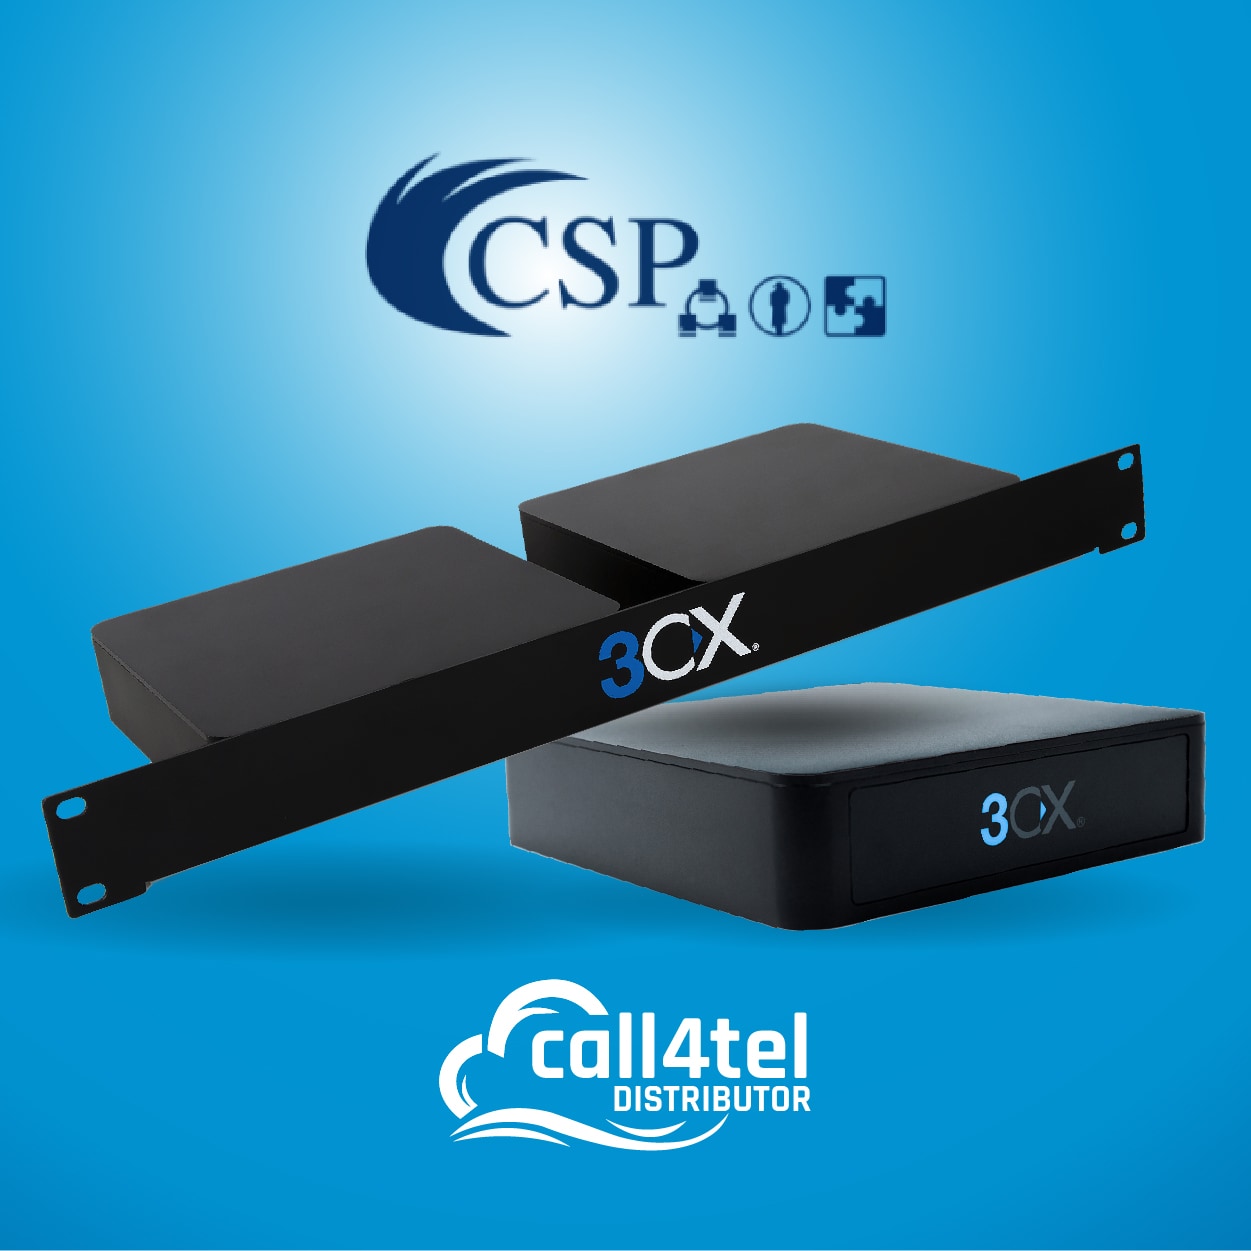 CSP Solutions is appointed as Call4tel 3CX PBX Aplliance distributor for Greece and Cyprus